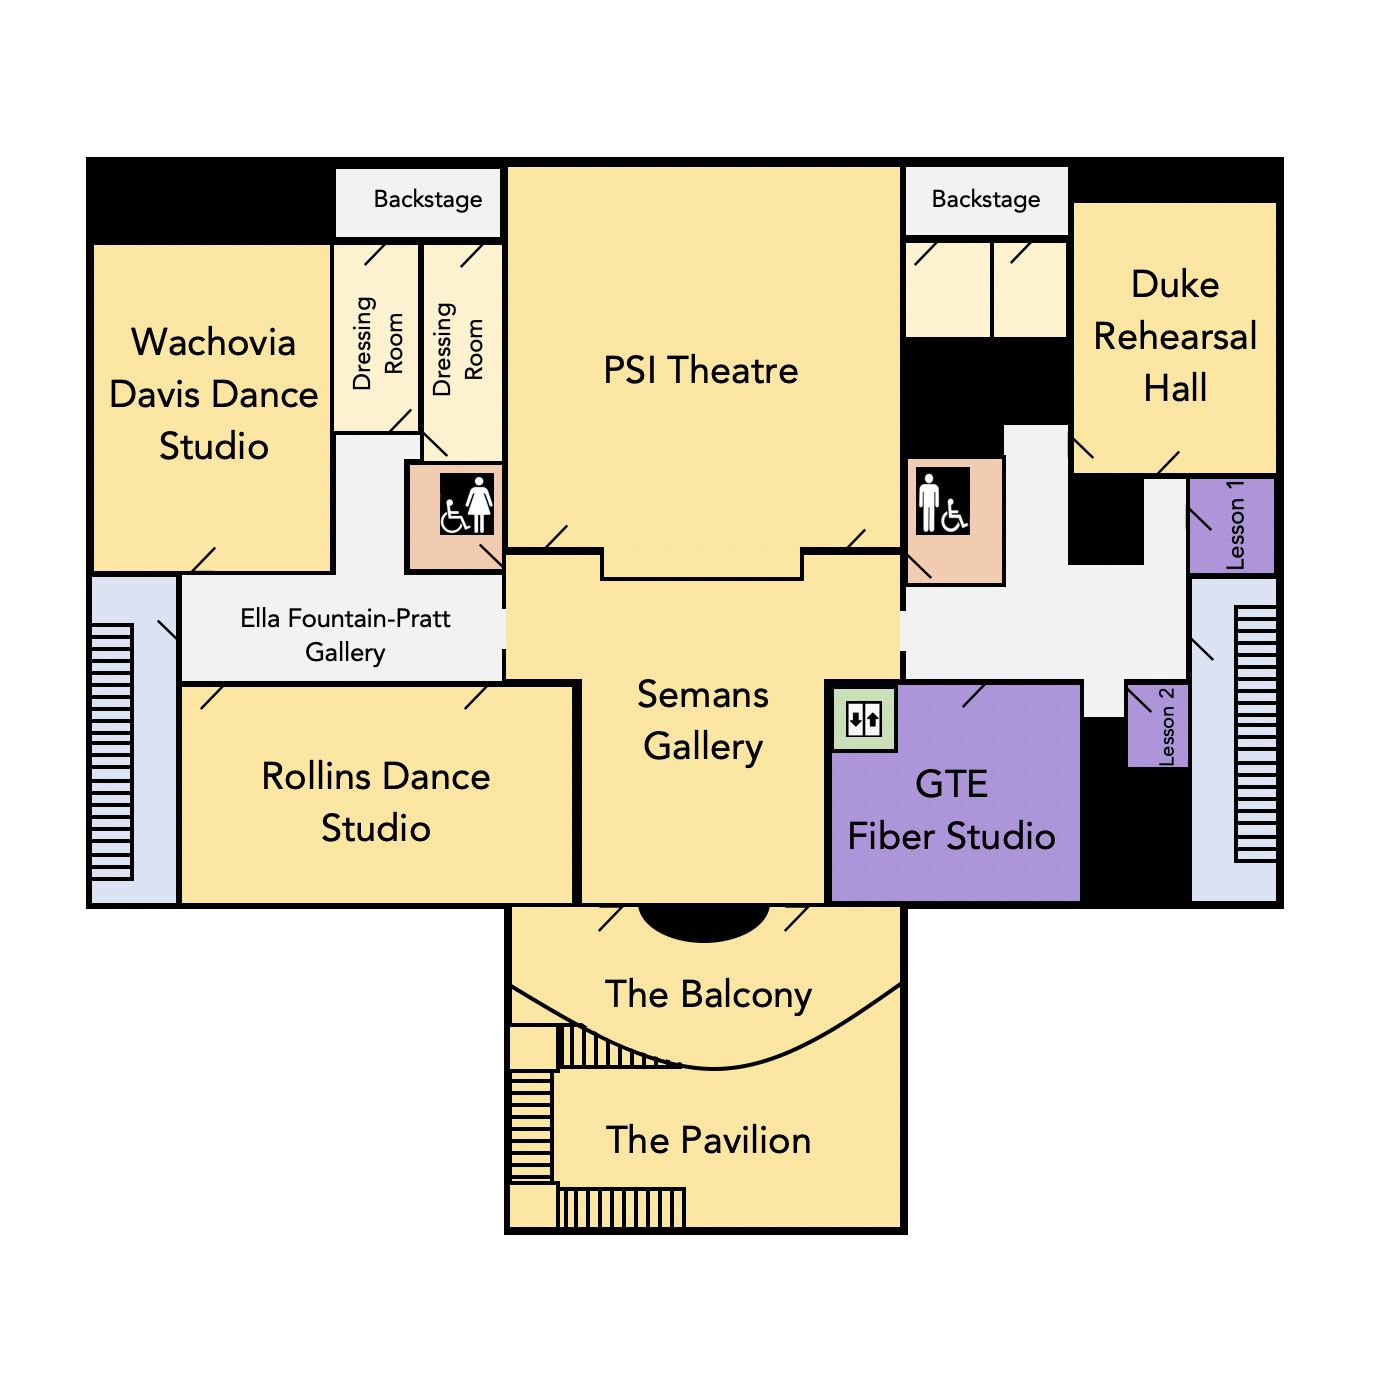 Floor plan of the upper level of the DAC building